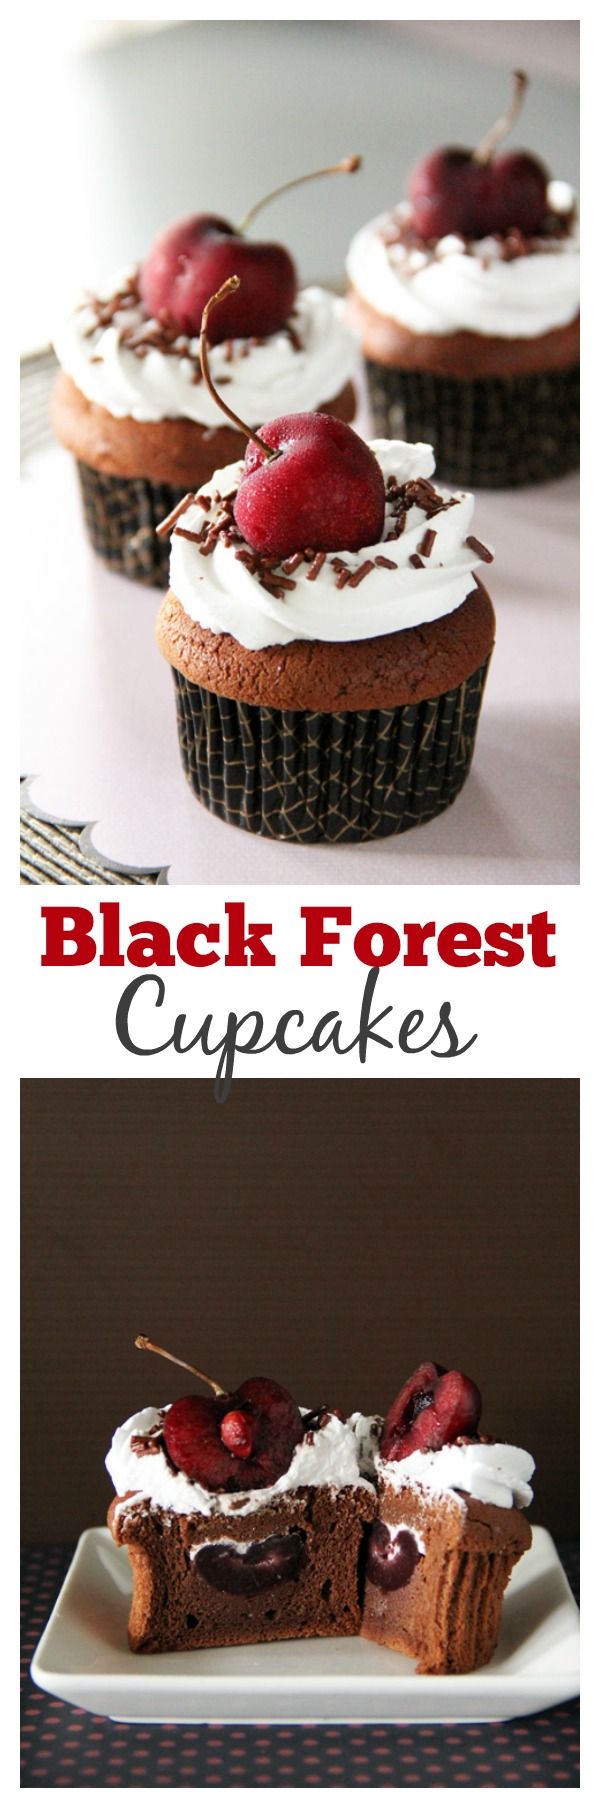 Black forest cupcakes - your favorite cake in a petite cupcake size. Amazing and delicious. Get the recipe now | rasamalaysia.com